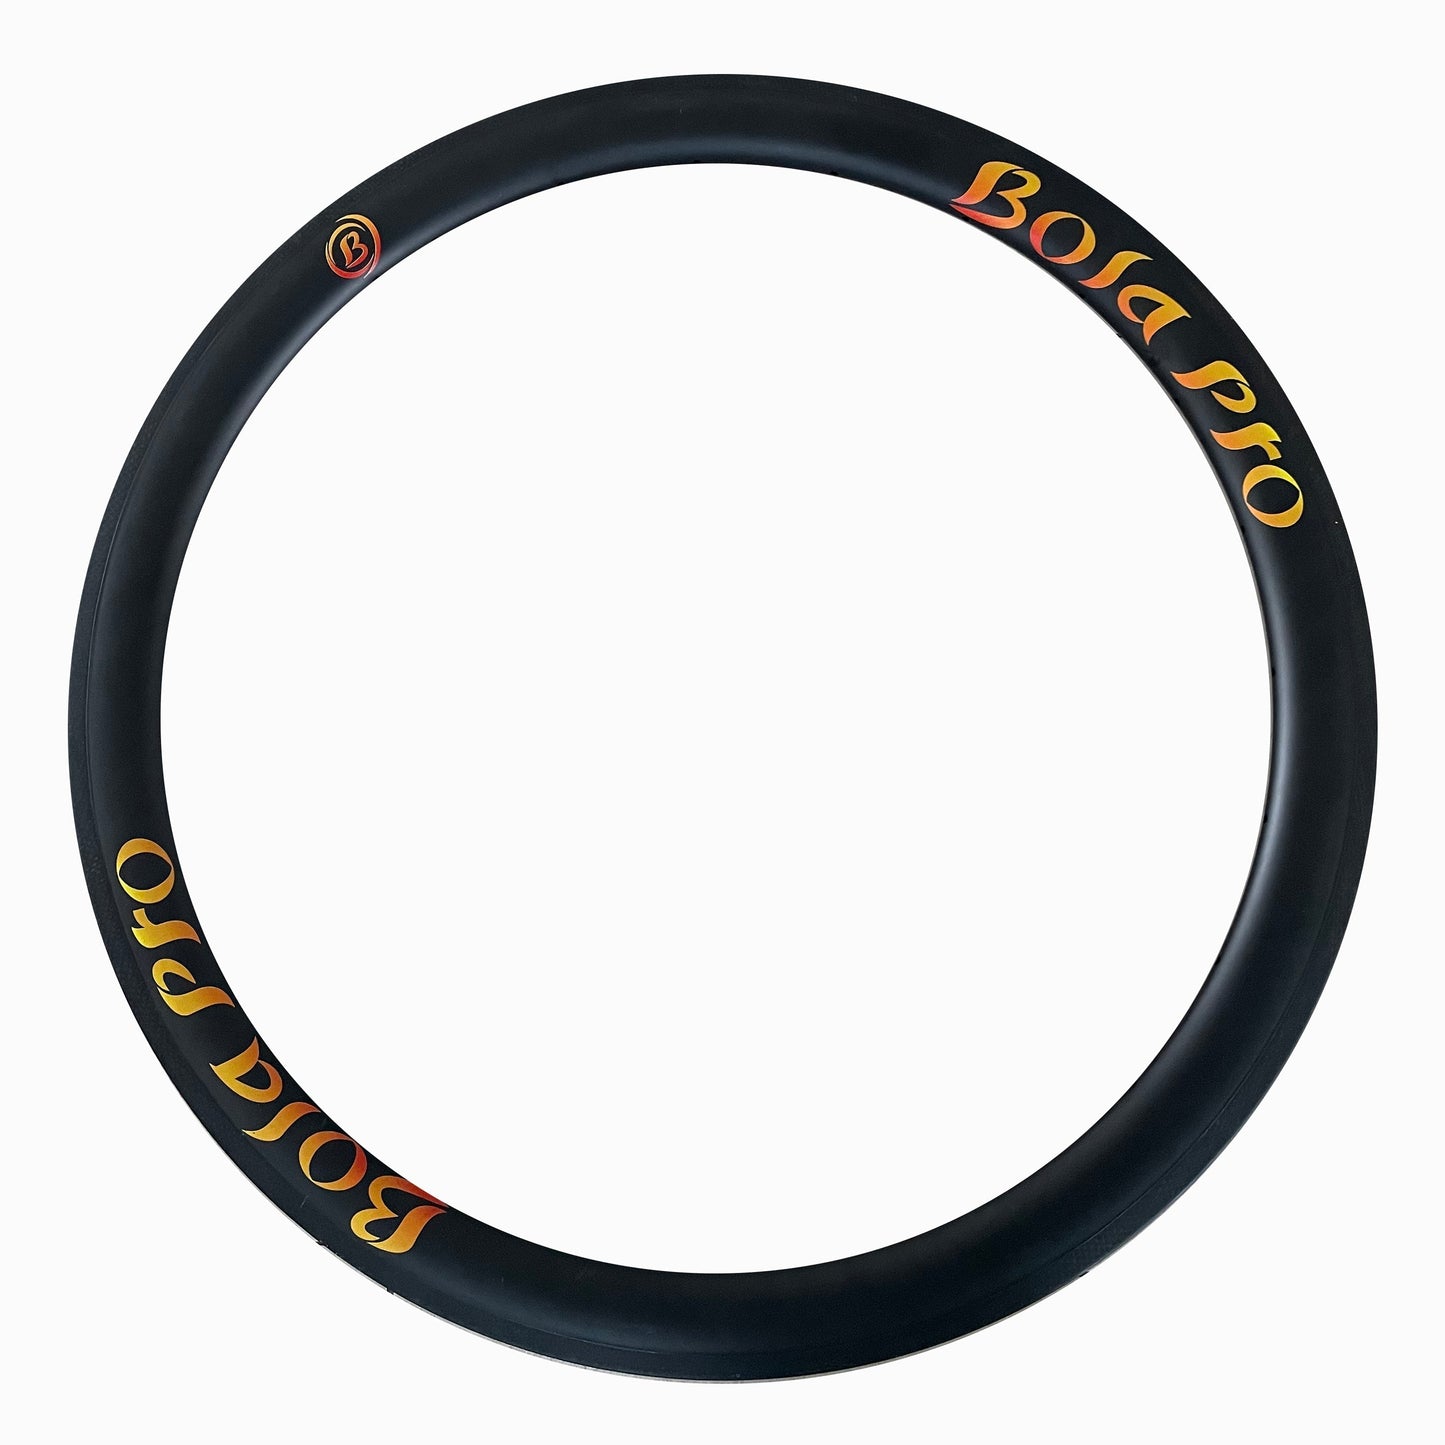 Tubeless  carbon rims 55mm profile 28mm outer wide  21mm inner wide